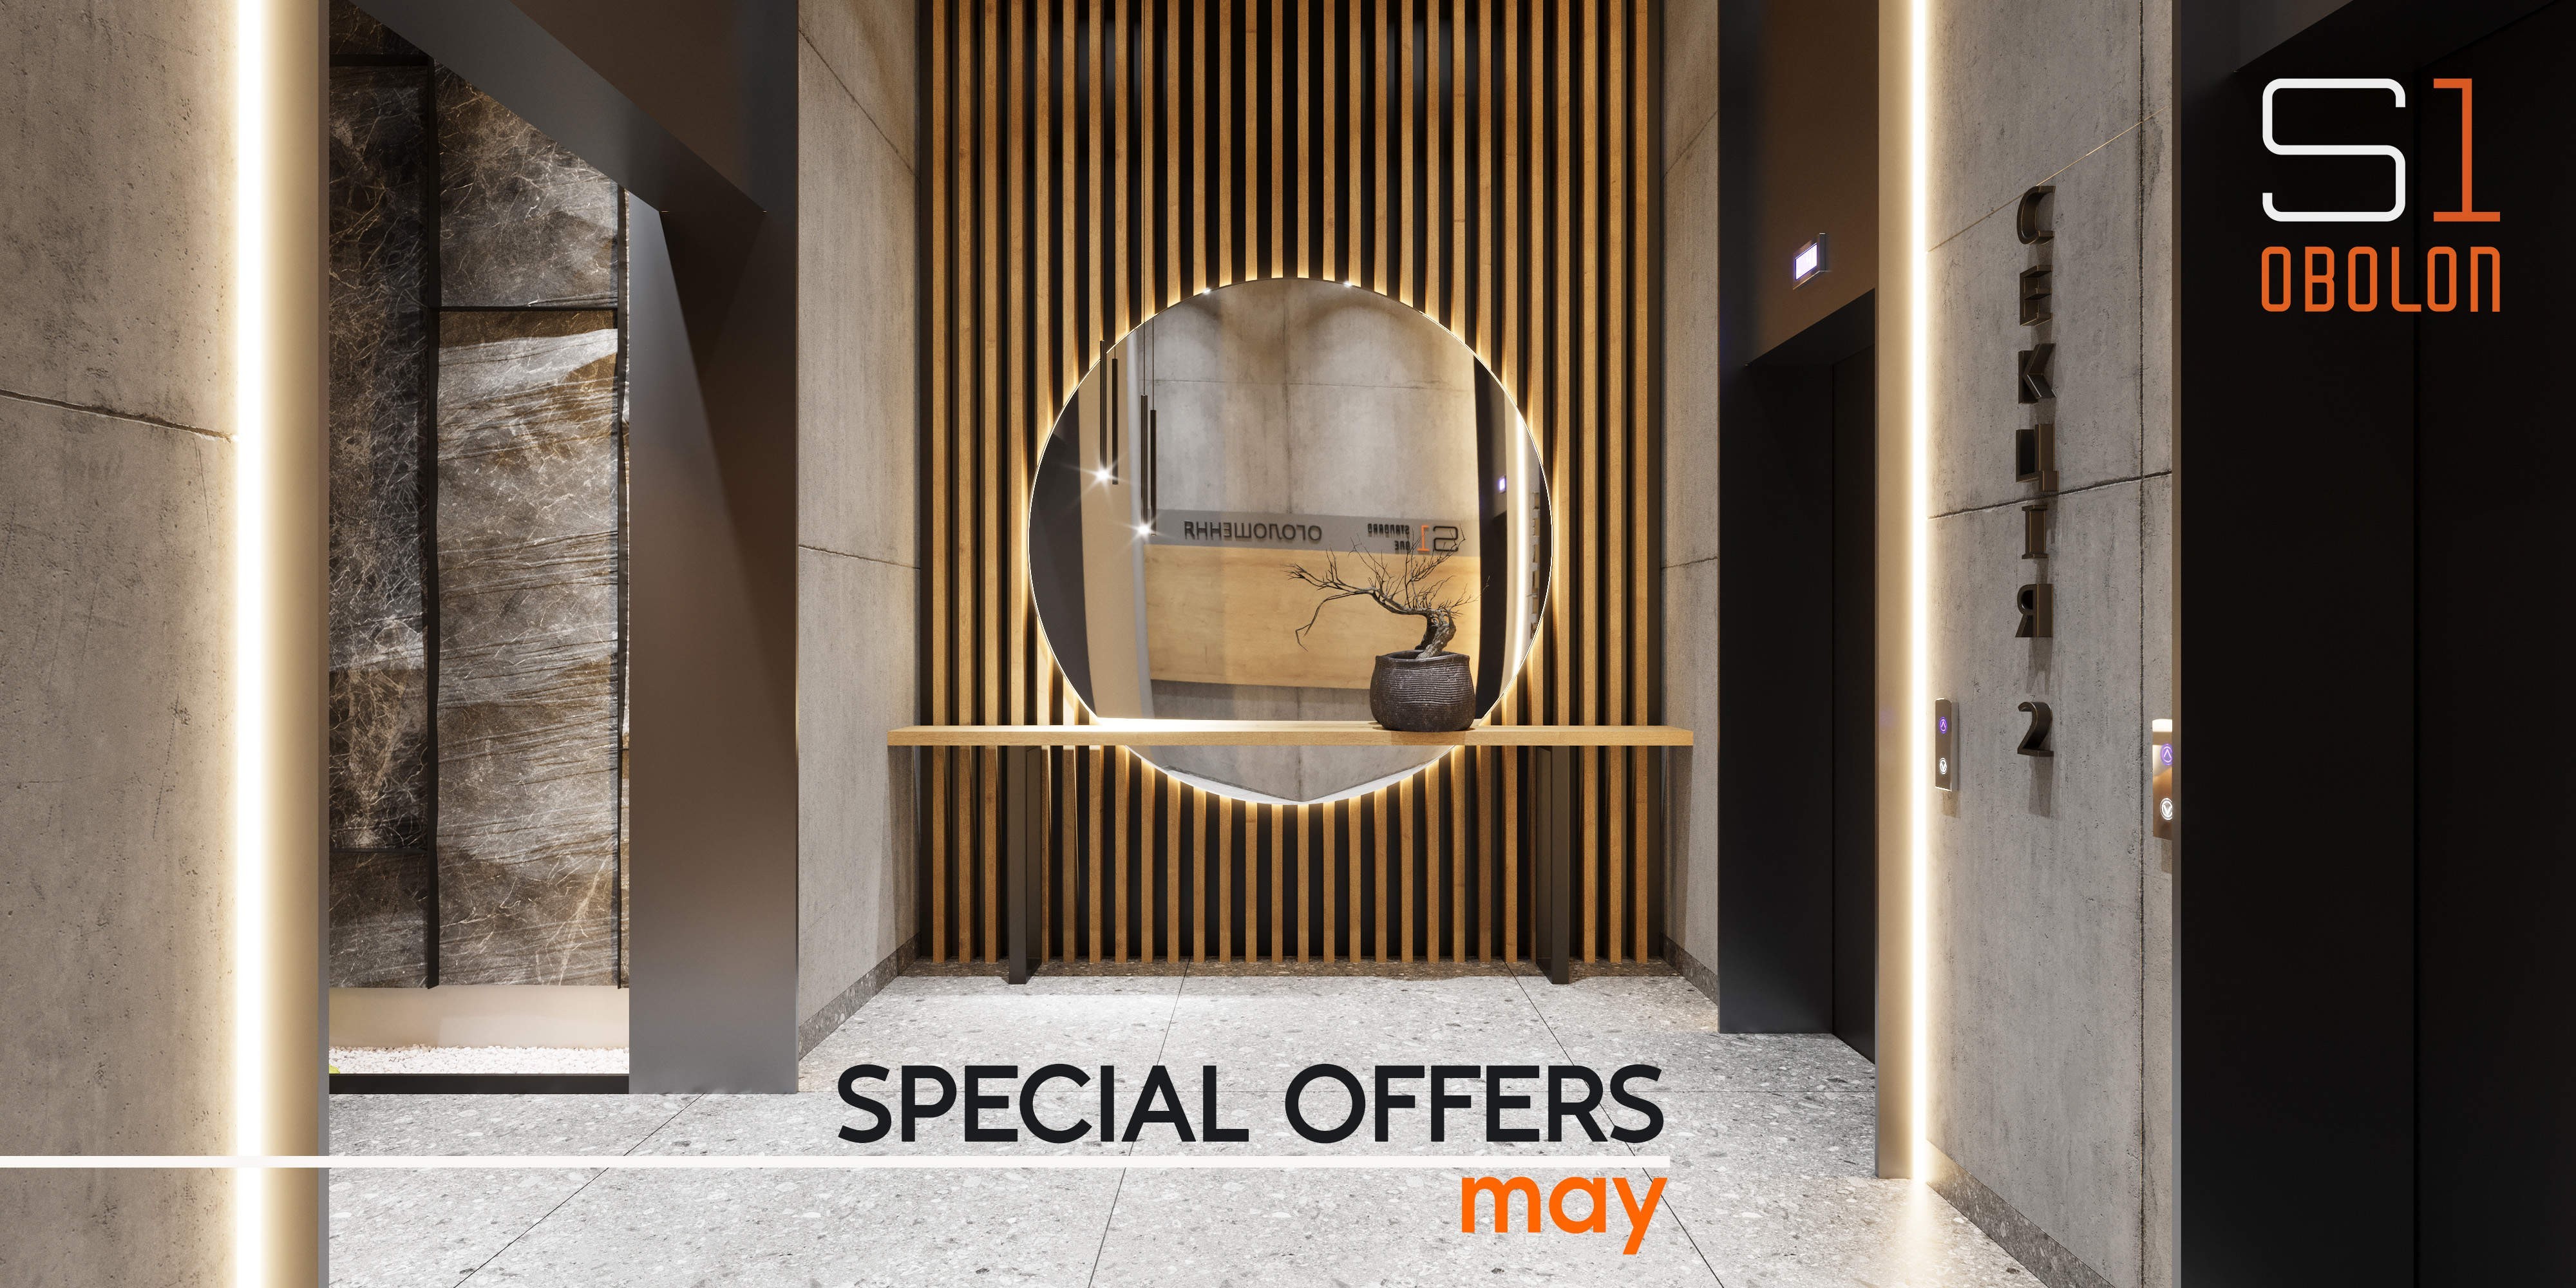 MAY: SPECIAL OFFERS FROM S1 OBOLON